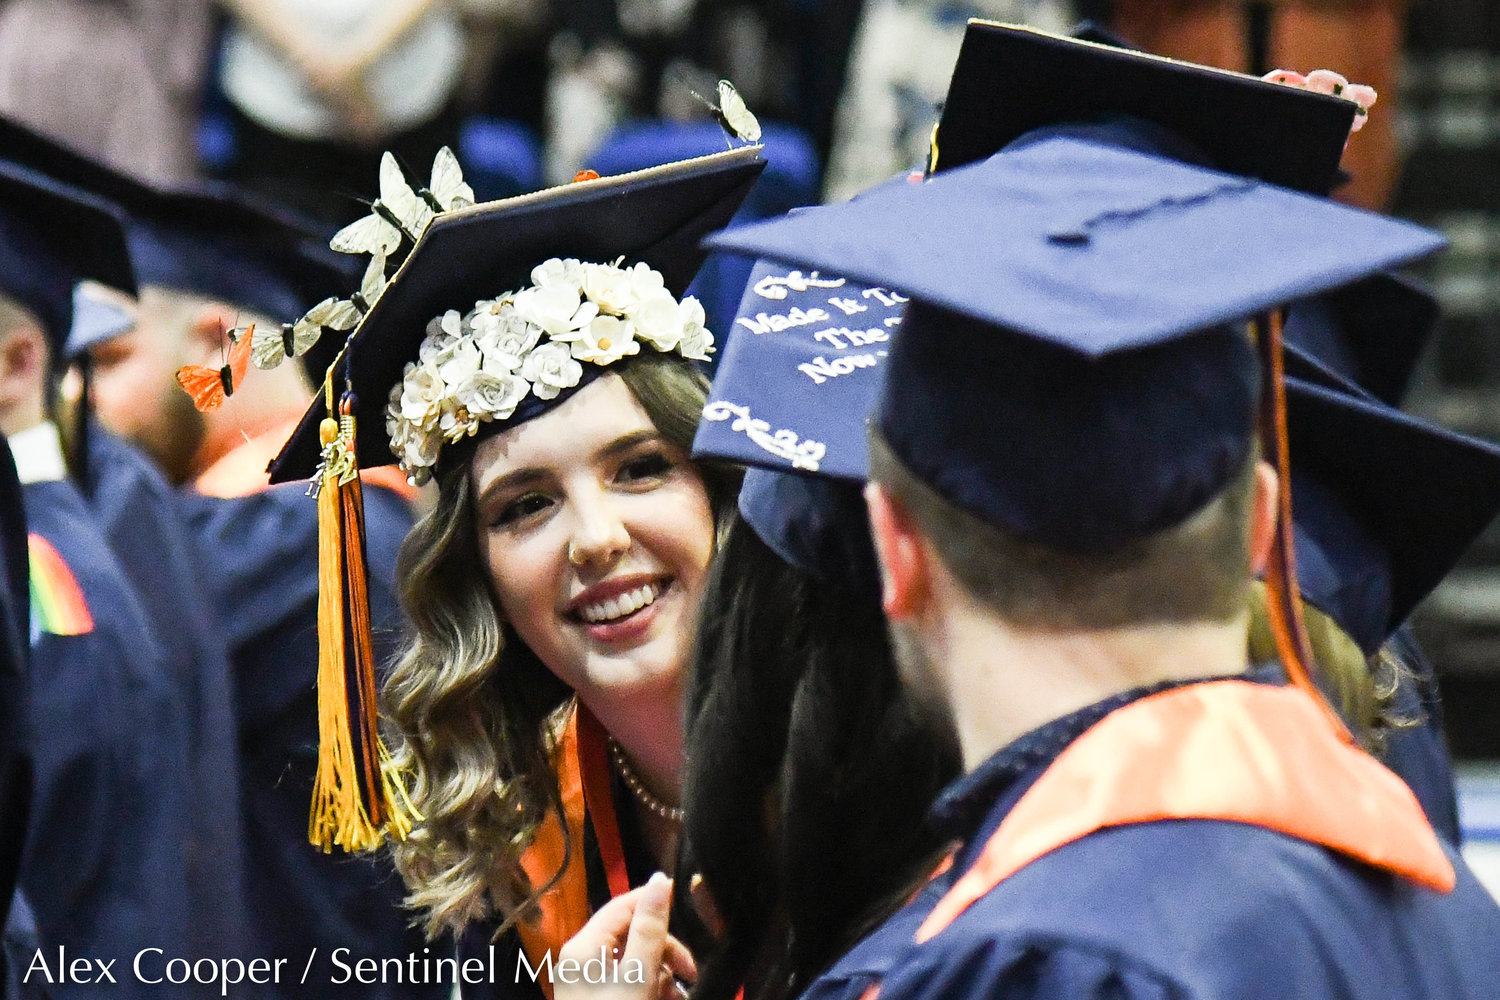 Utica University graduate Amra Becirevic wears a cap decorated with flowers and butterflies during the school's undergraduate commencement ceremony on Thursday afternoon at the Adirondack Bank Center at the Utica Memorial Auditorium.